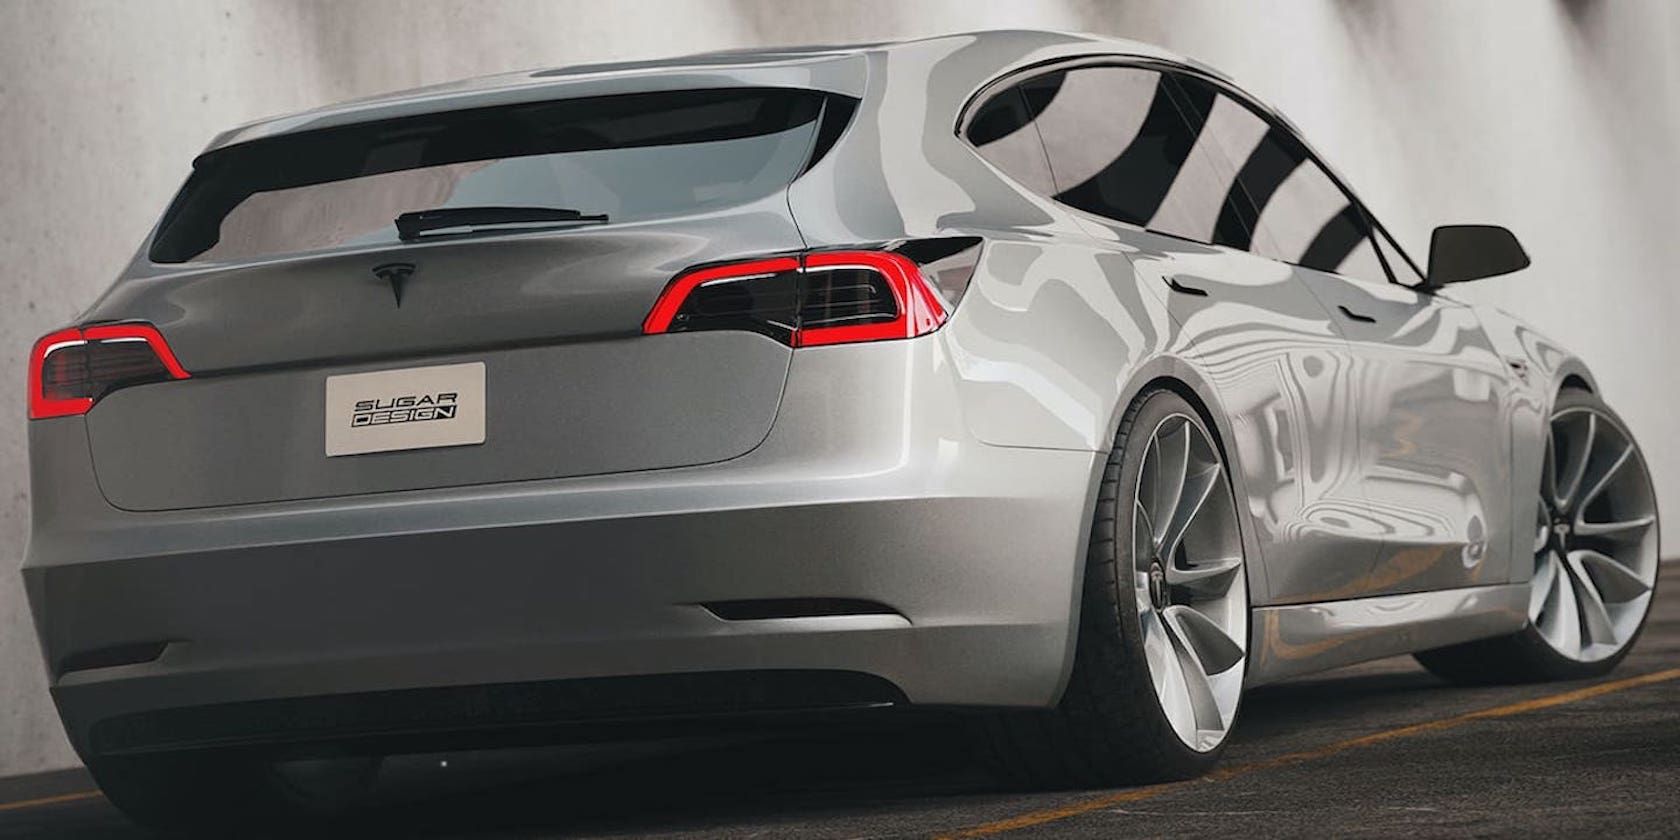 The Tesla Model 2 Is Coming - Here's What to Expect